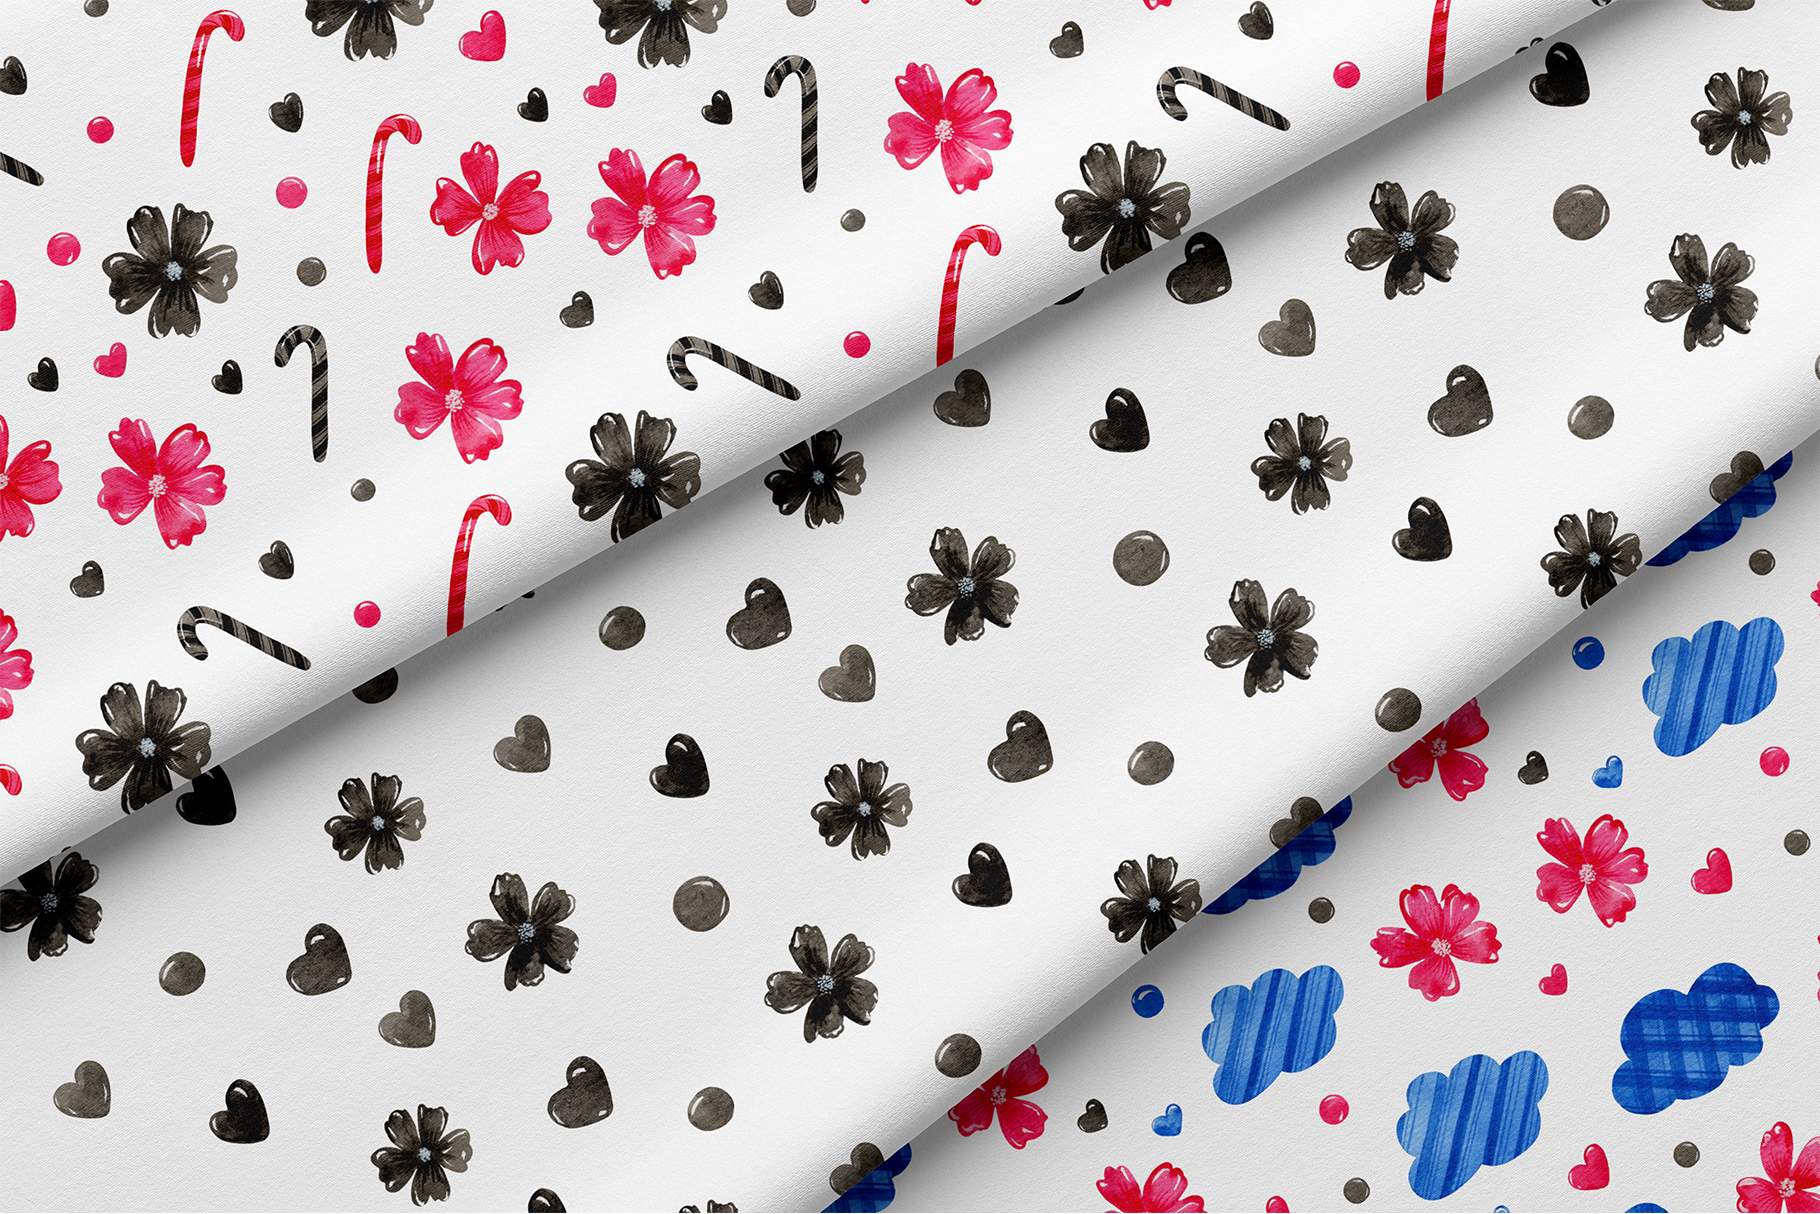 Pattern of hearts and flowers on a white background.